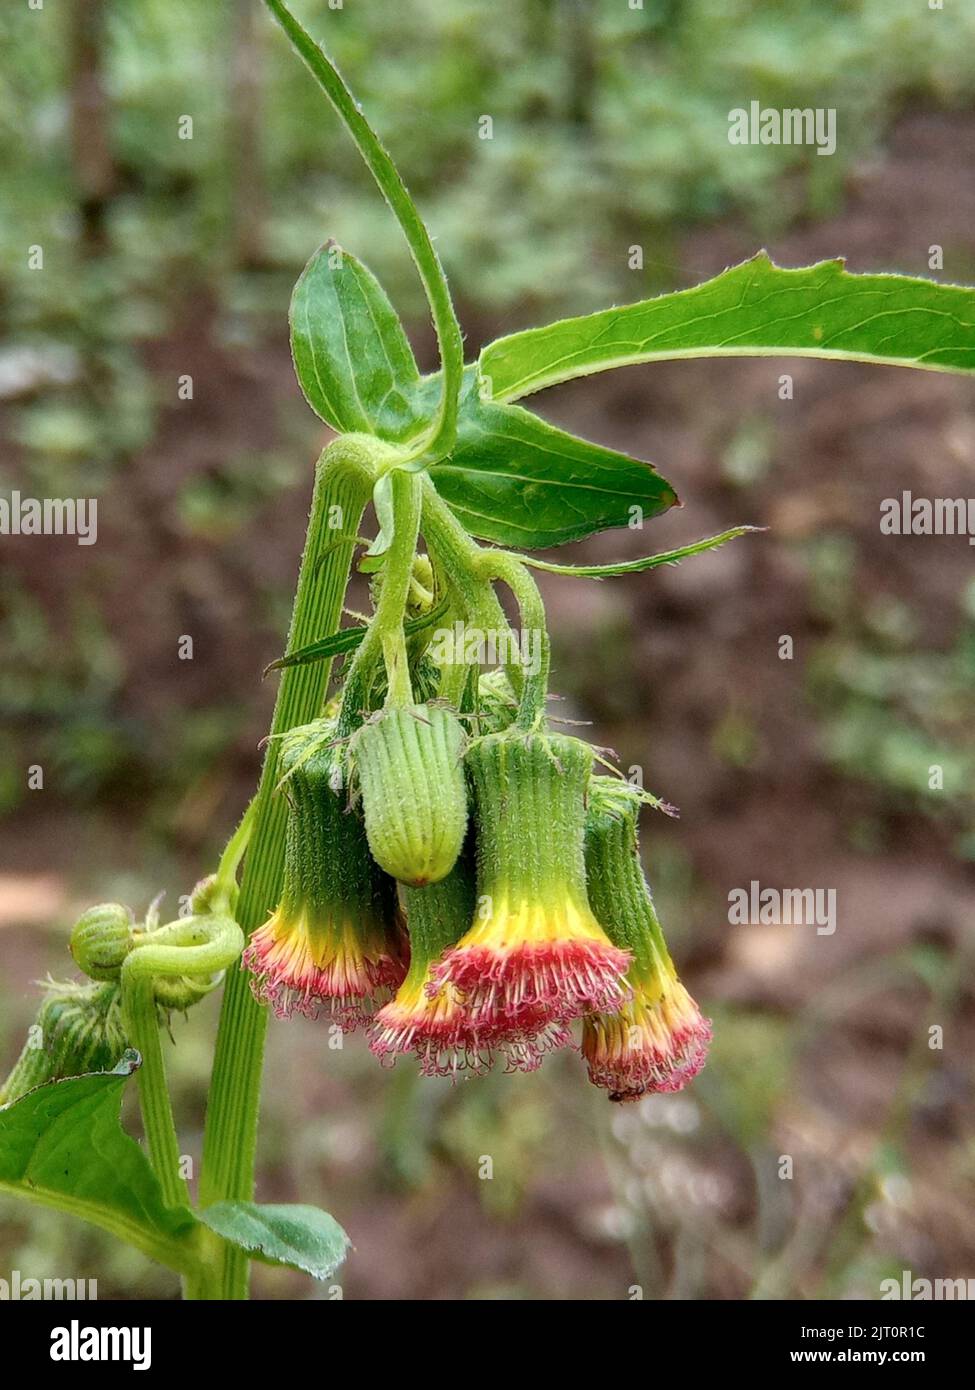 A vertical closeup of an ebolo (Crassocephalum crepidioides) flower growing with green leaves Stock Photo